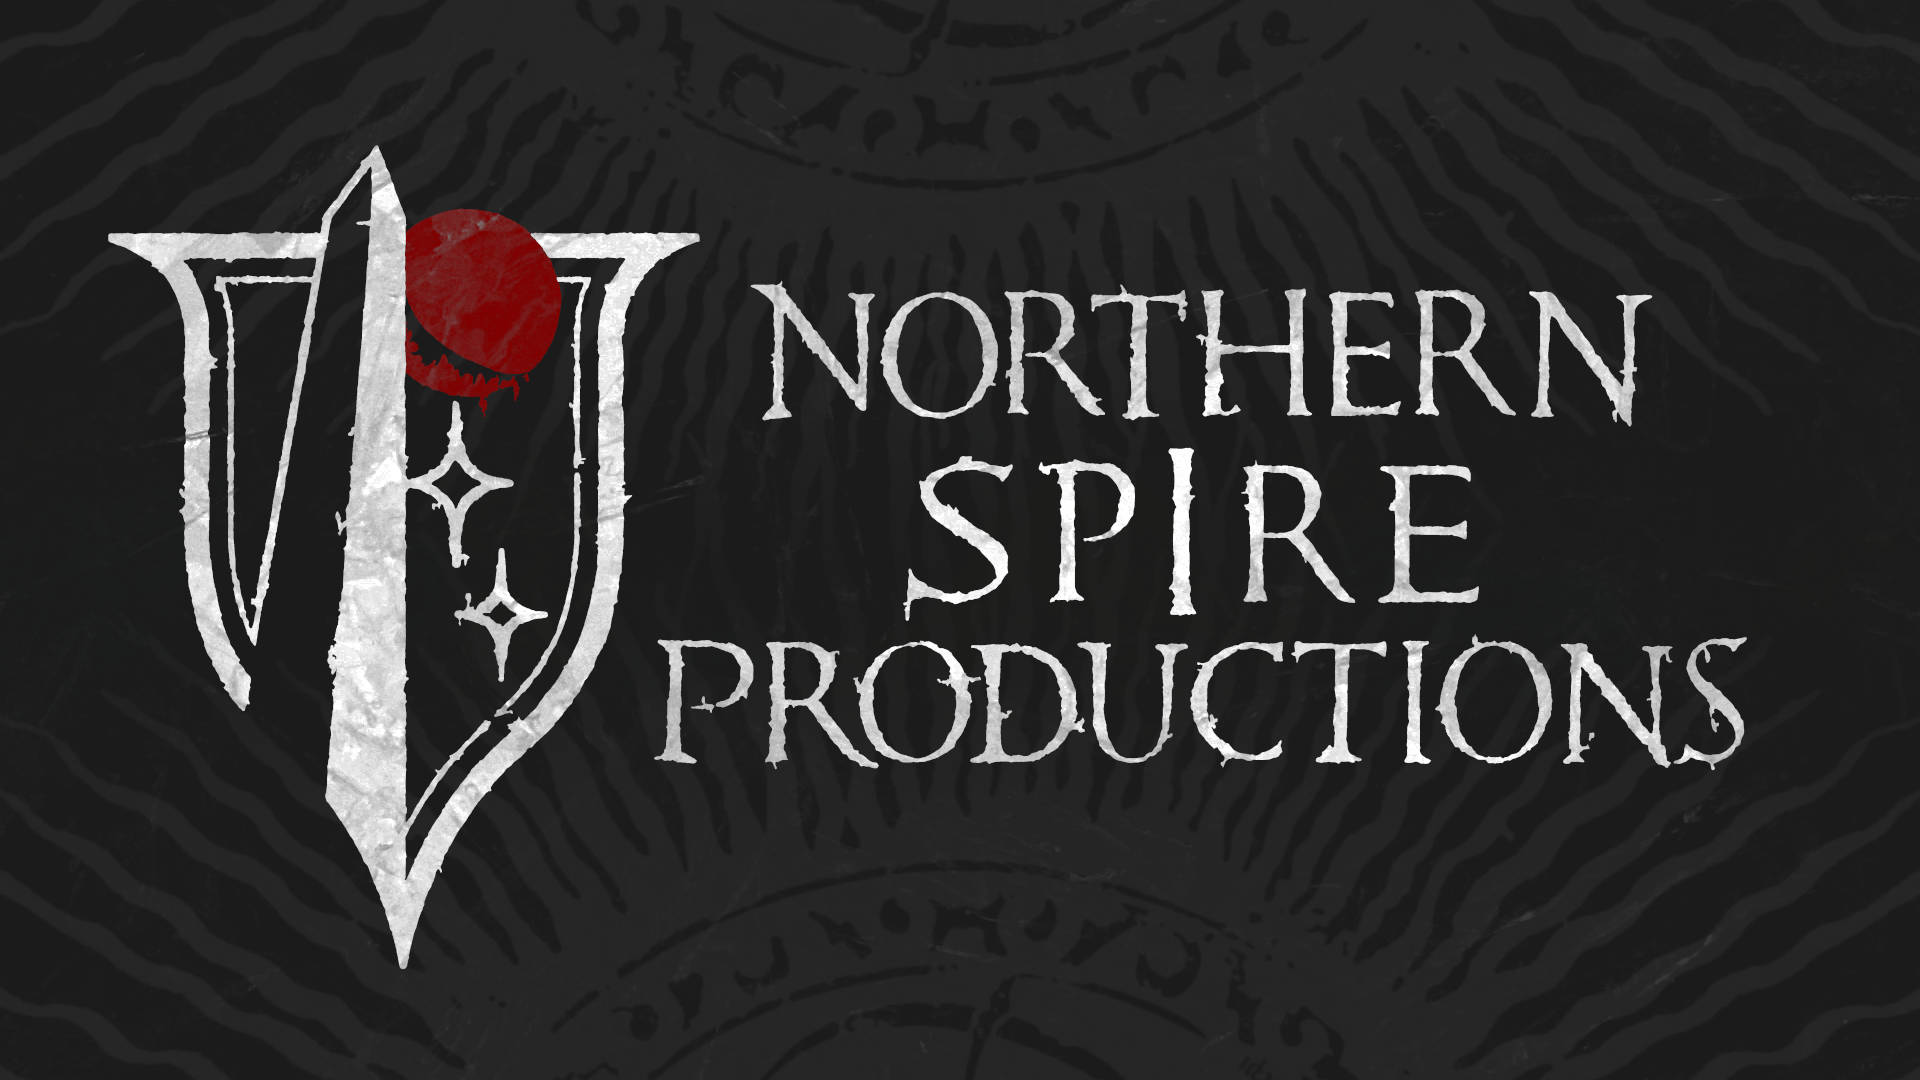 Logo for Northern Spire Productions, featuring a spire over red moon inside a crest; a brand managed by Korpi AKA Blake von Schloss.